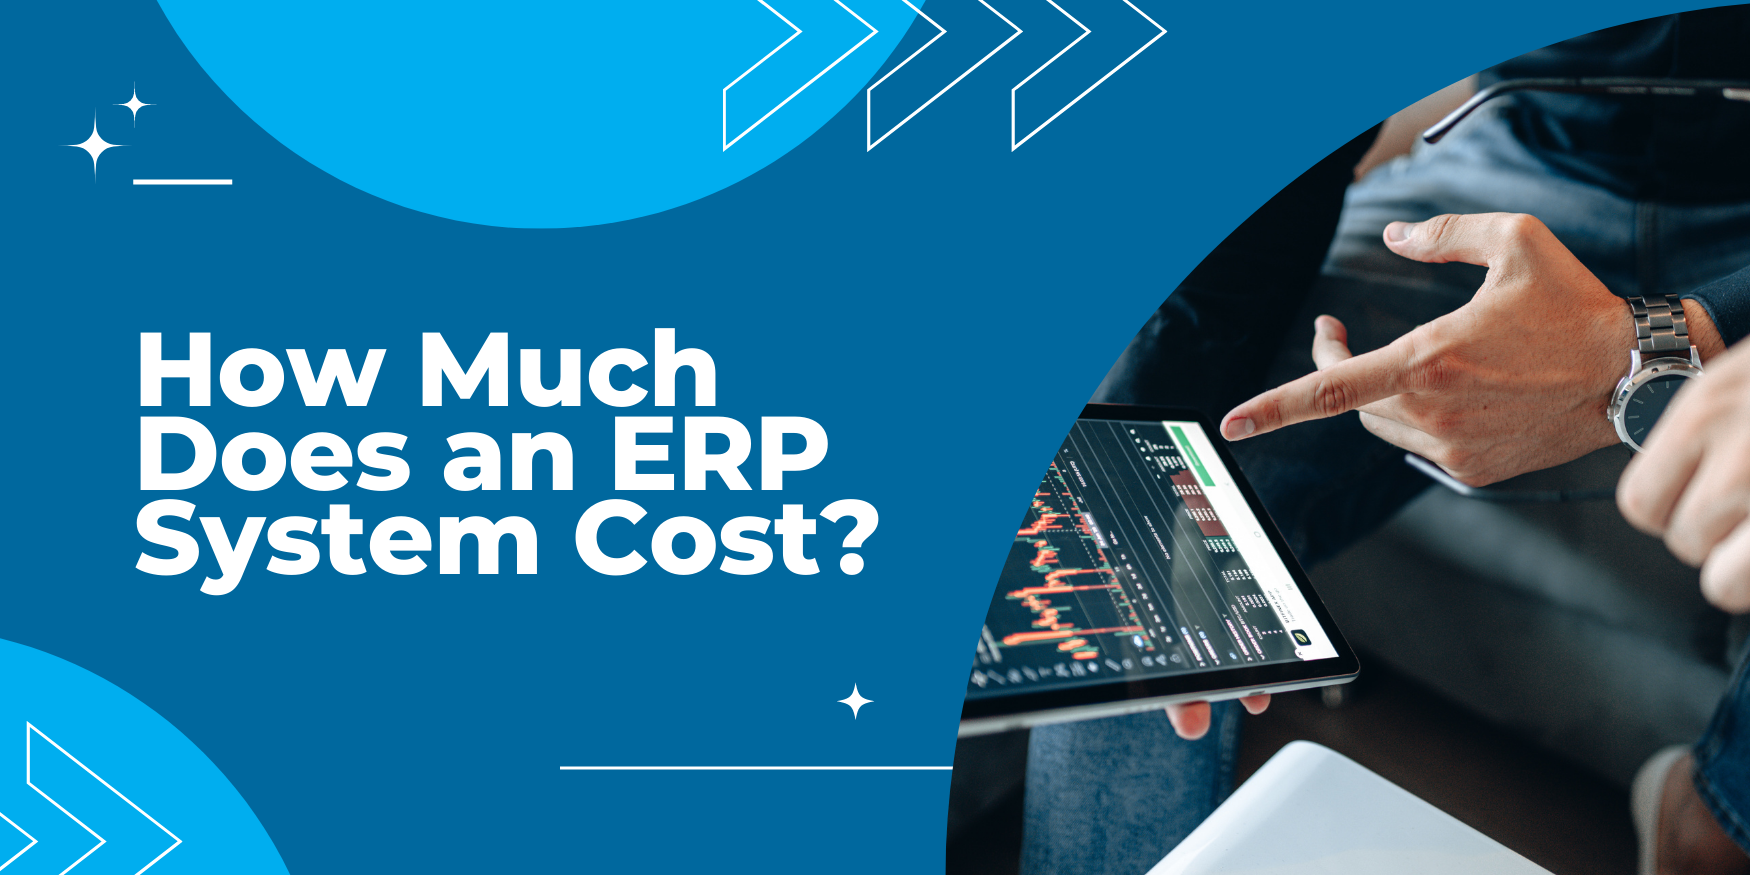 How Much Does an ERP System Cost?